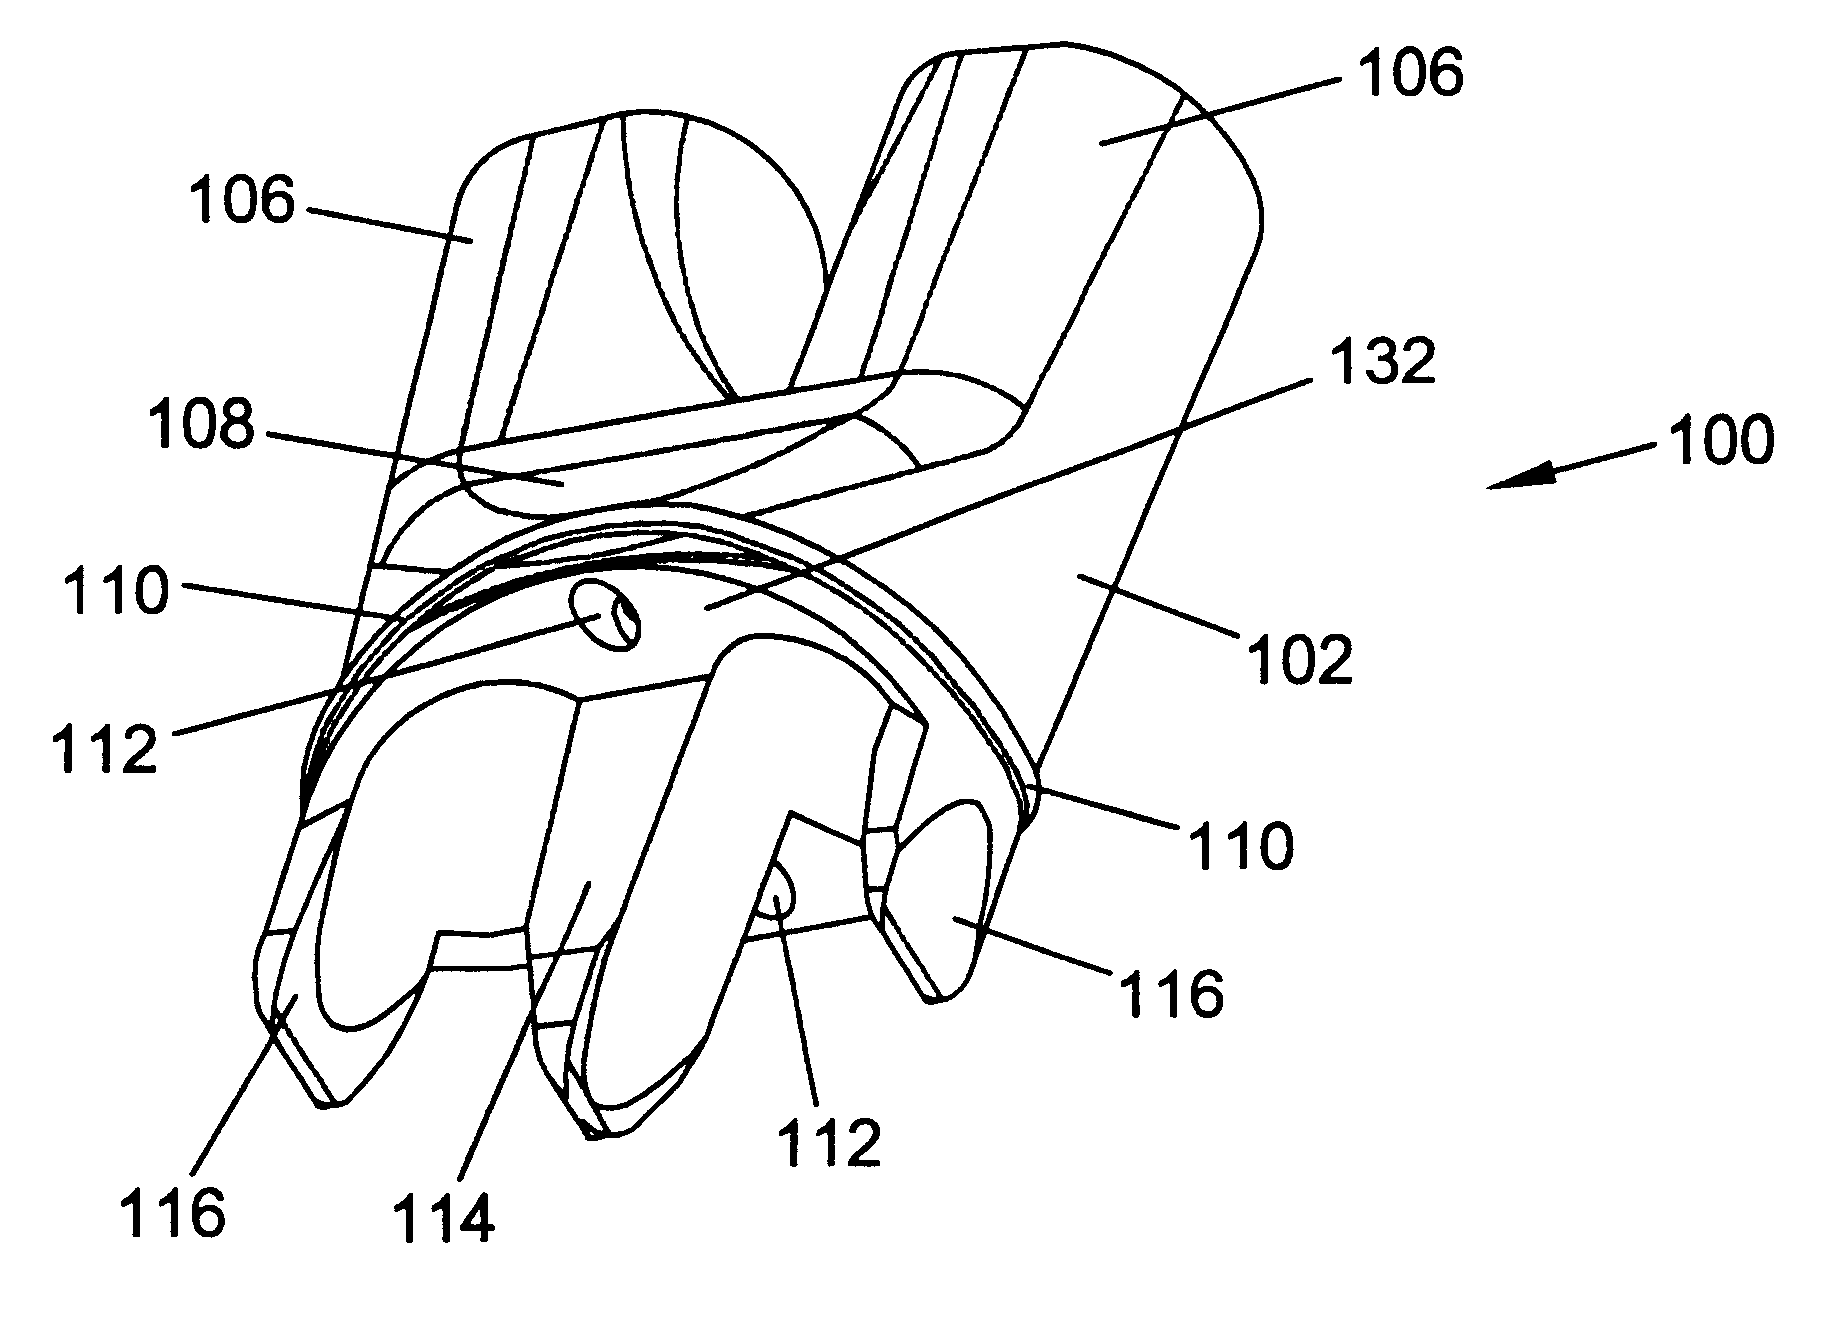 Instrument and method for implanting an interbody fusion device